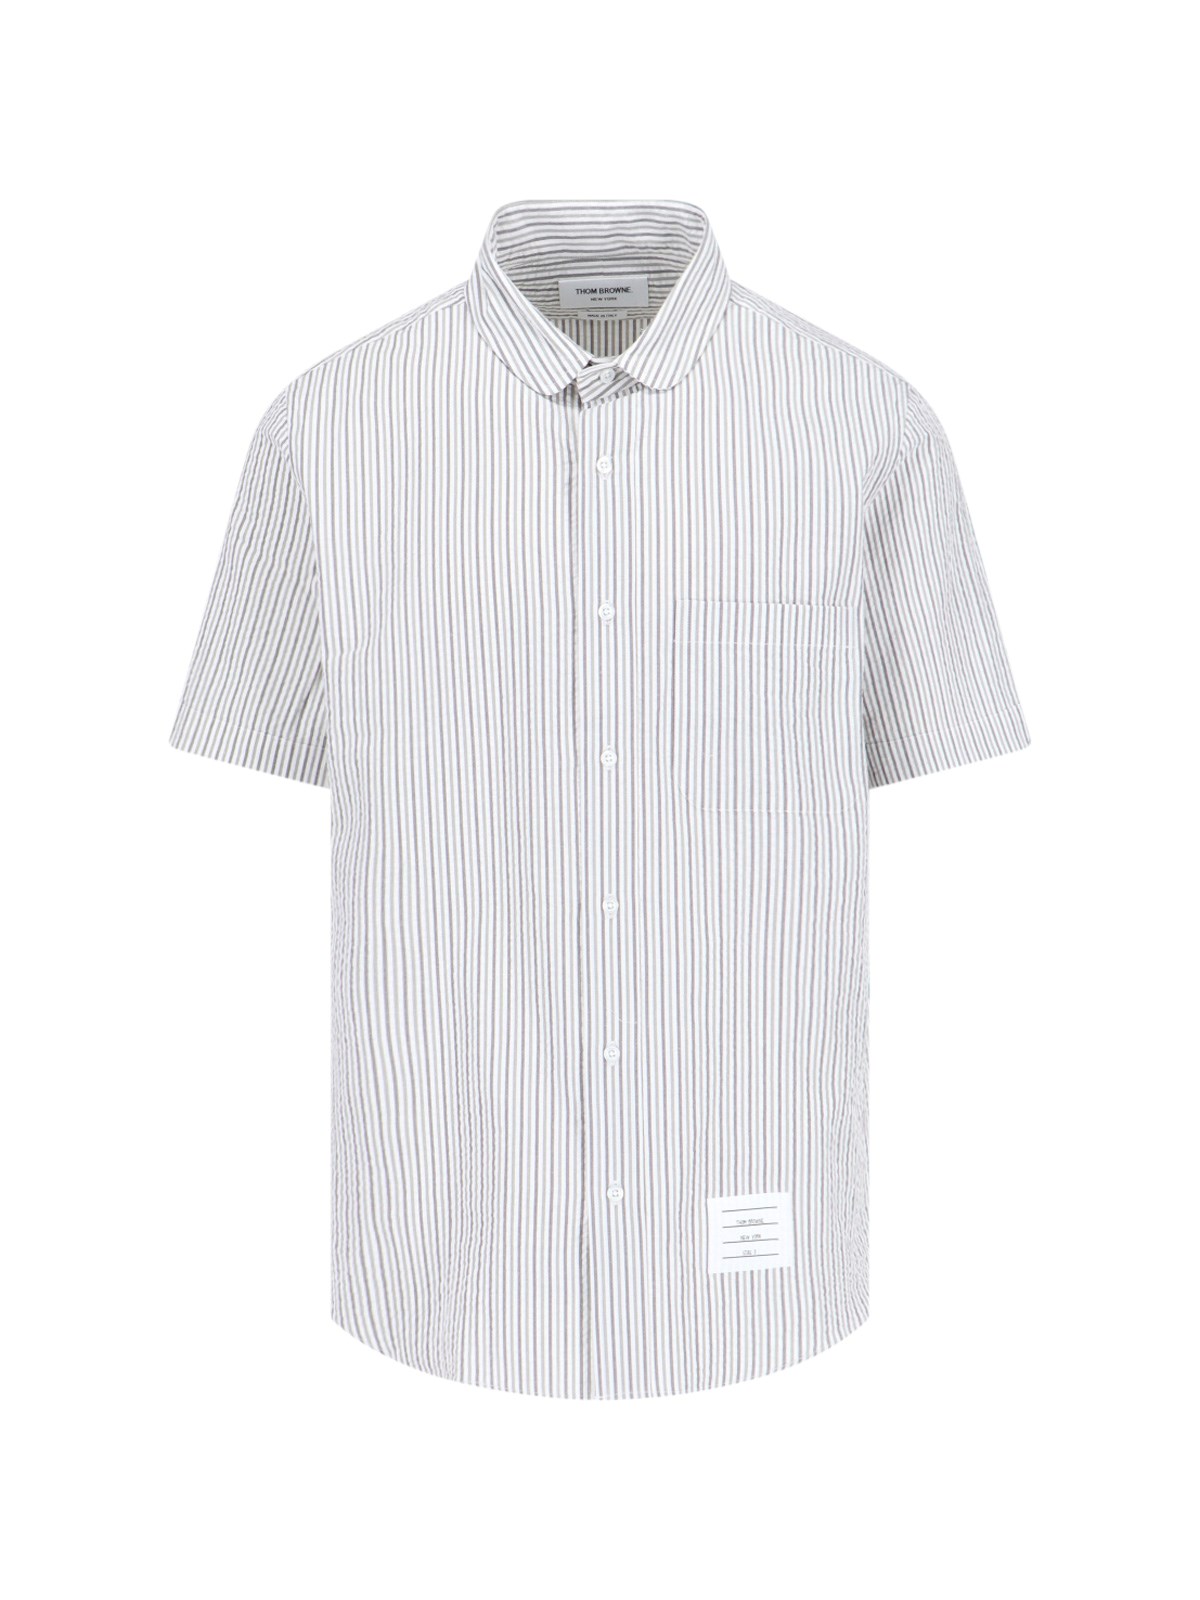 Thom Browne Striped Shirt In Silver